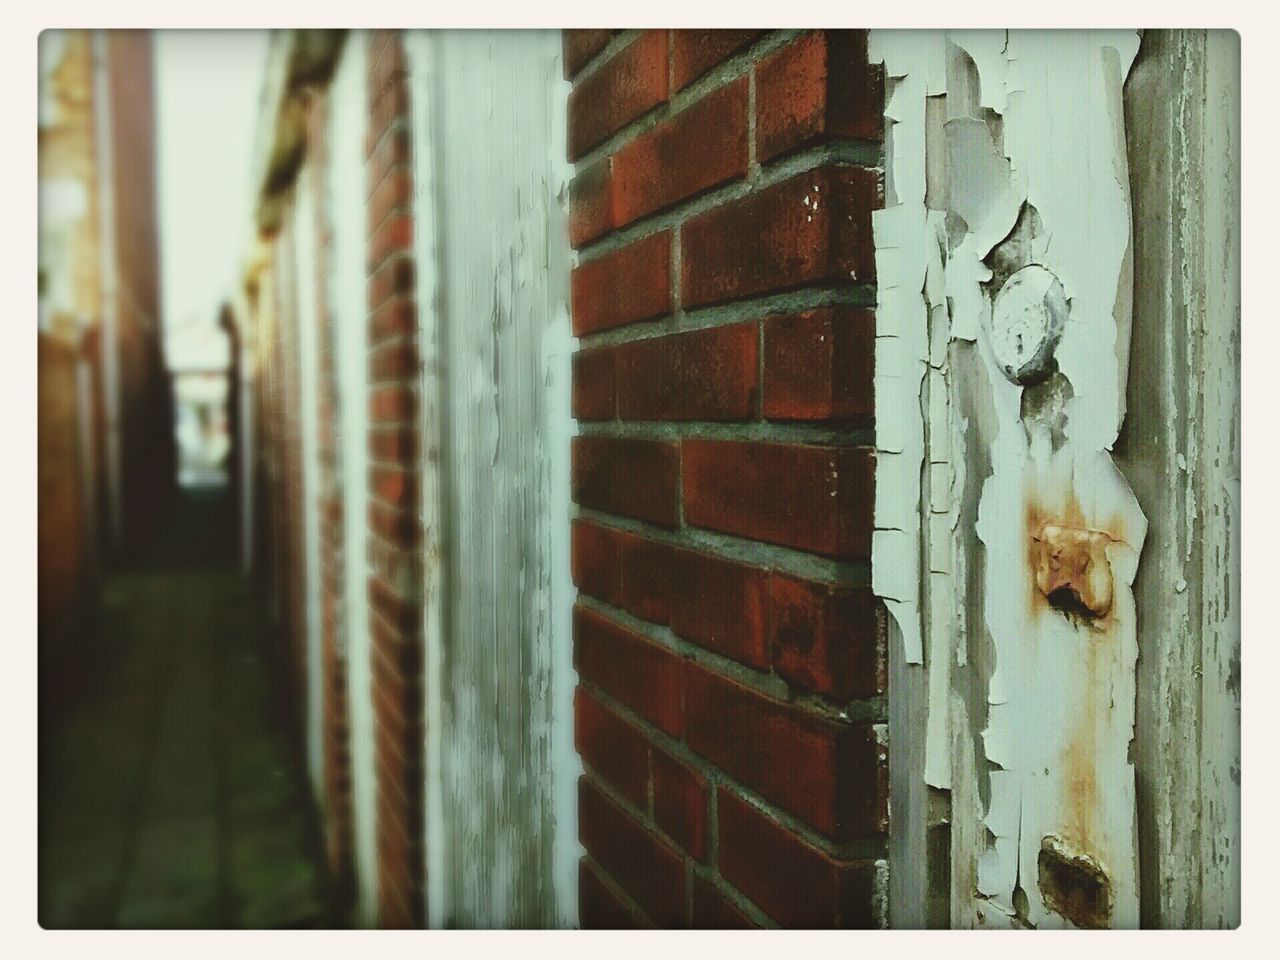 transfer print, auto post production filter, built structure, architecture, building exterior, door, wall - building feature, textured, wood - material, closed, close-up, wall, weathered, day, wooden, outdoors, no people, old, pattern, house